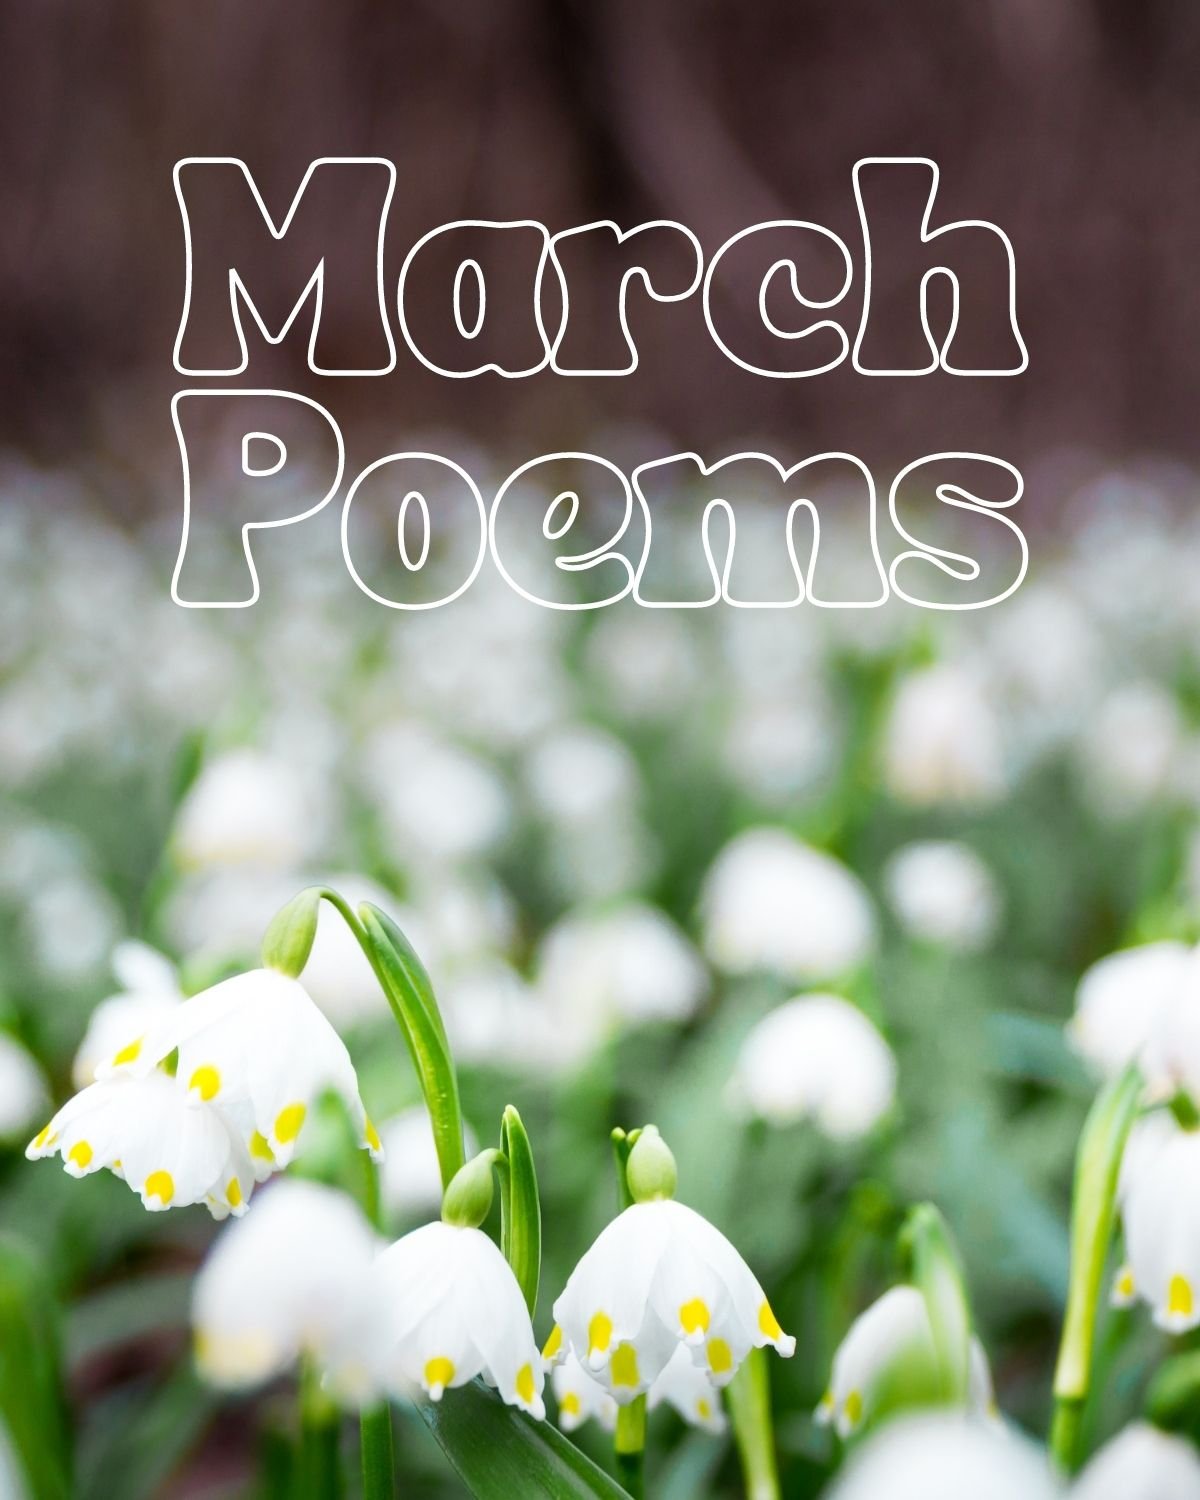 March Poems About A field of flowers